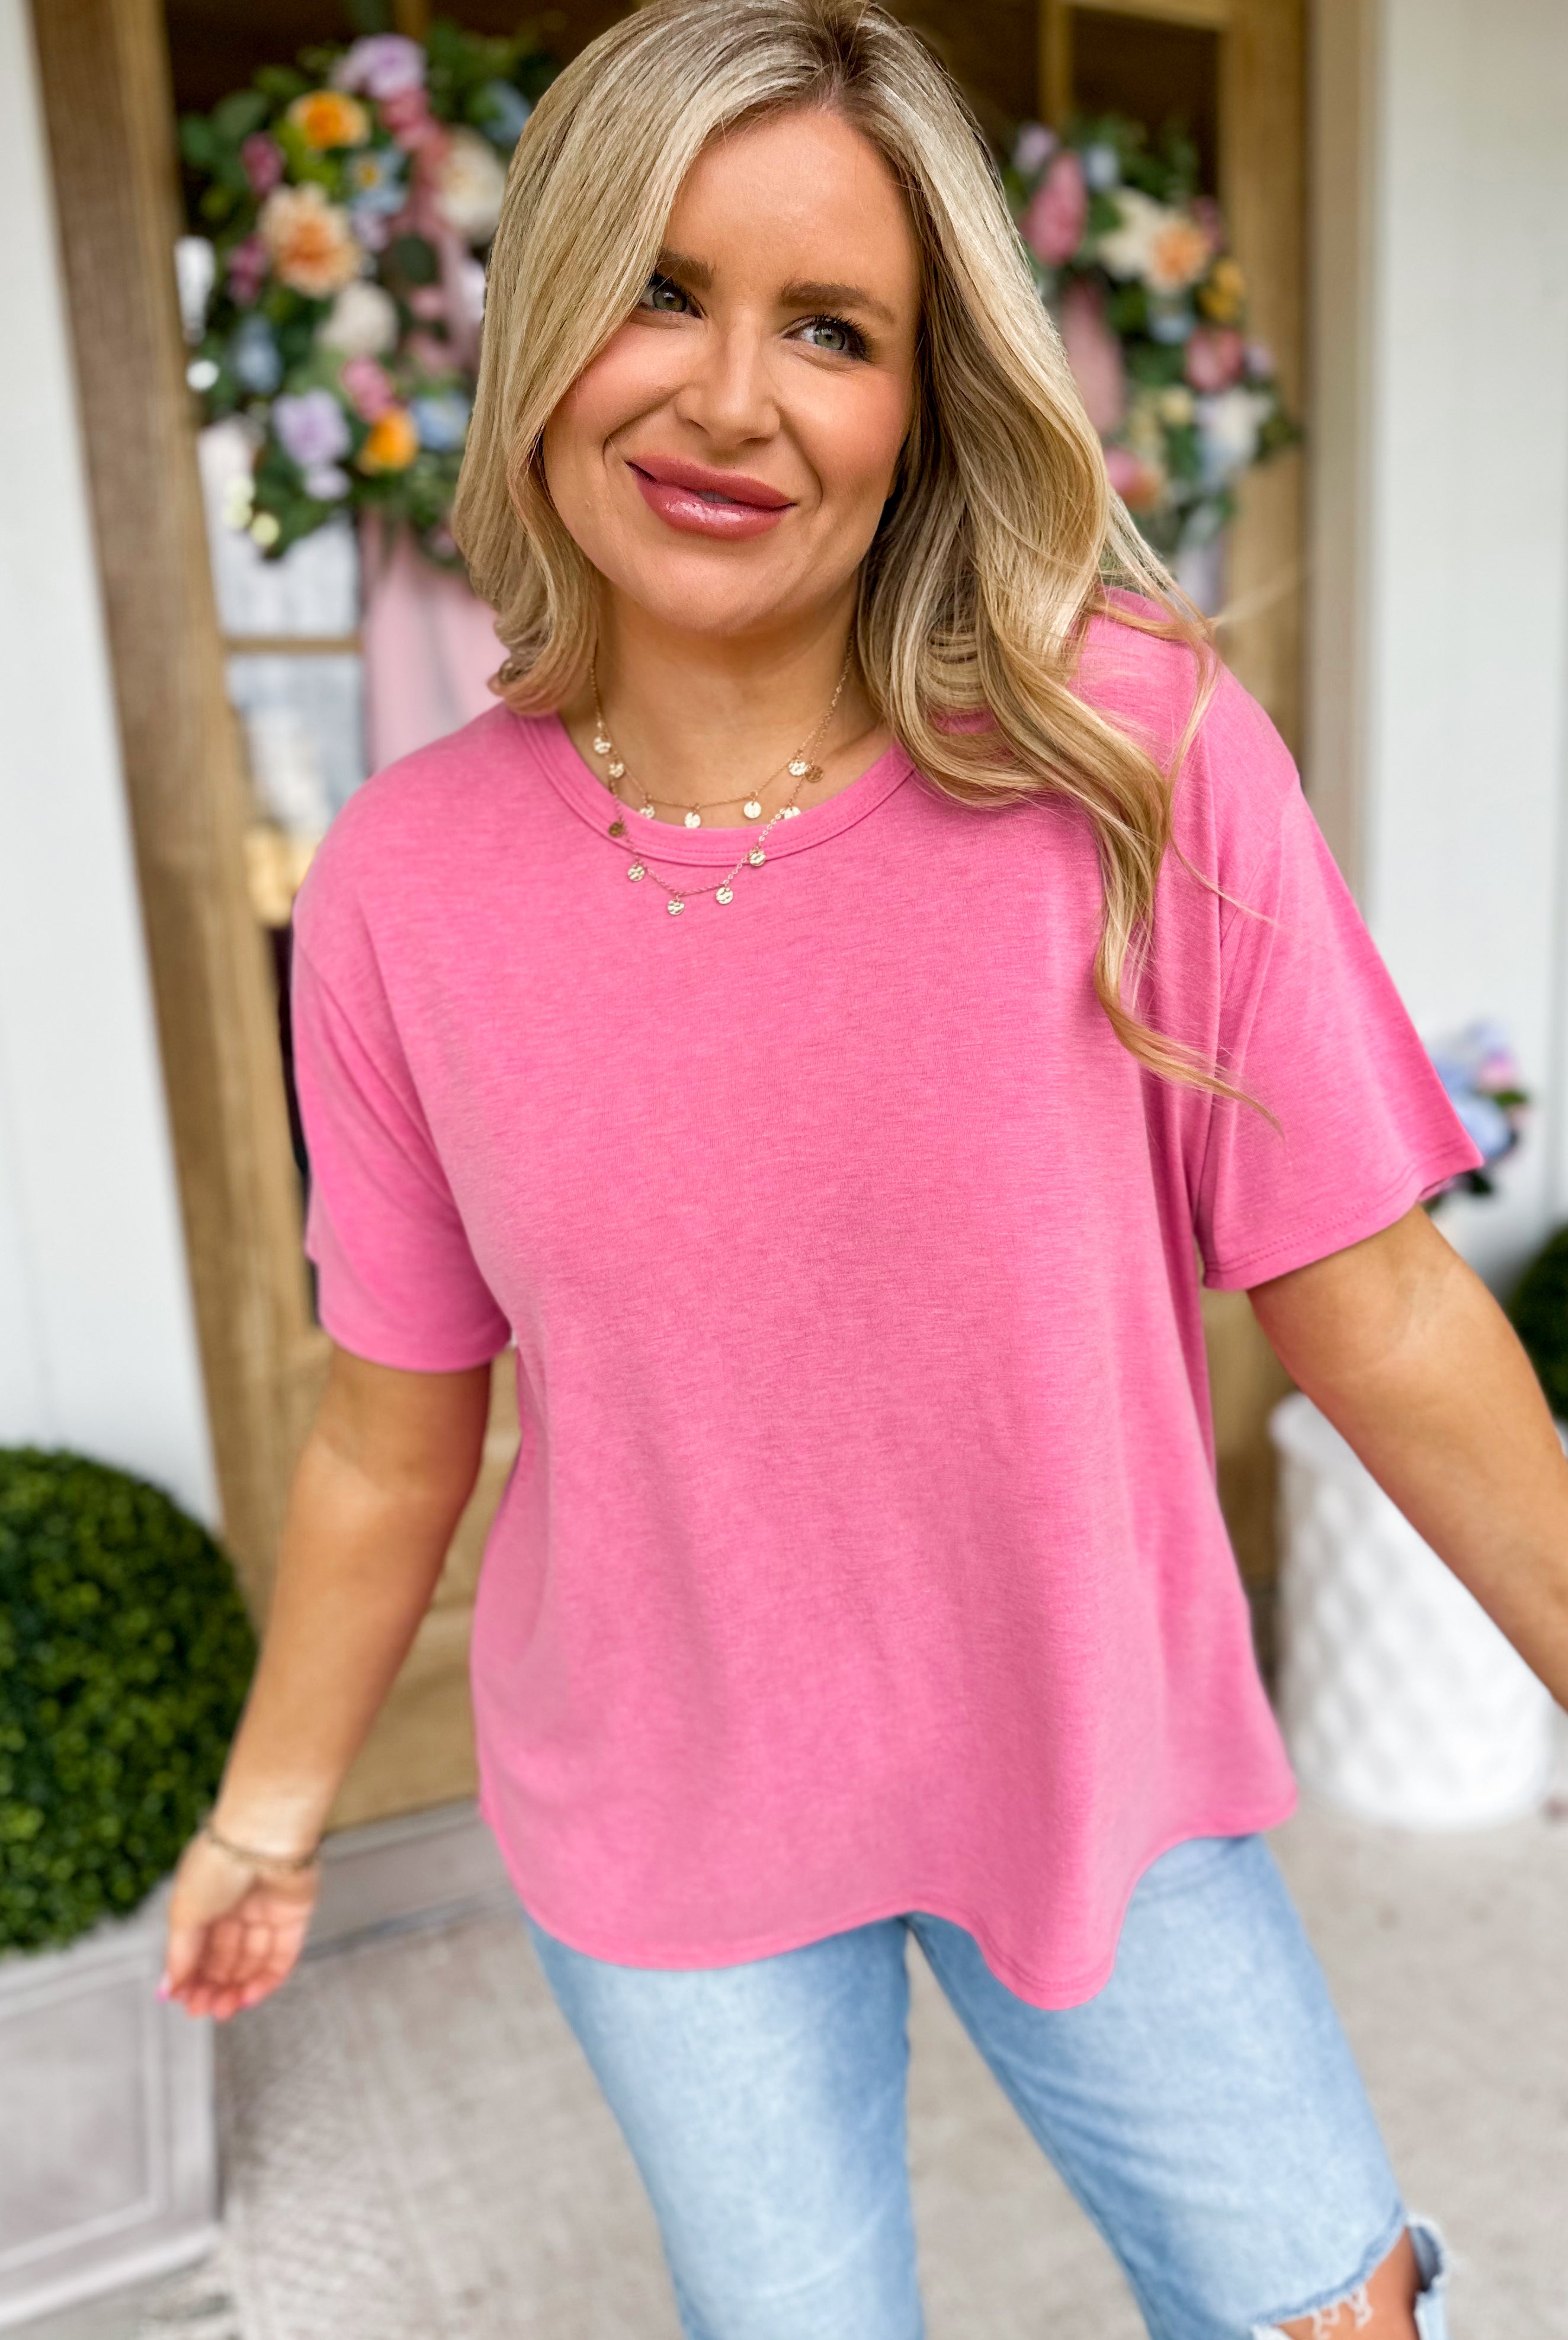 Chris Easy Wear Round Neck Short Sleeve Top - Be You Boutique